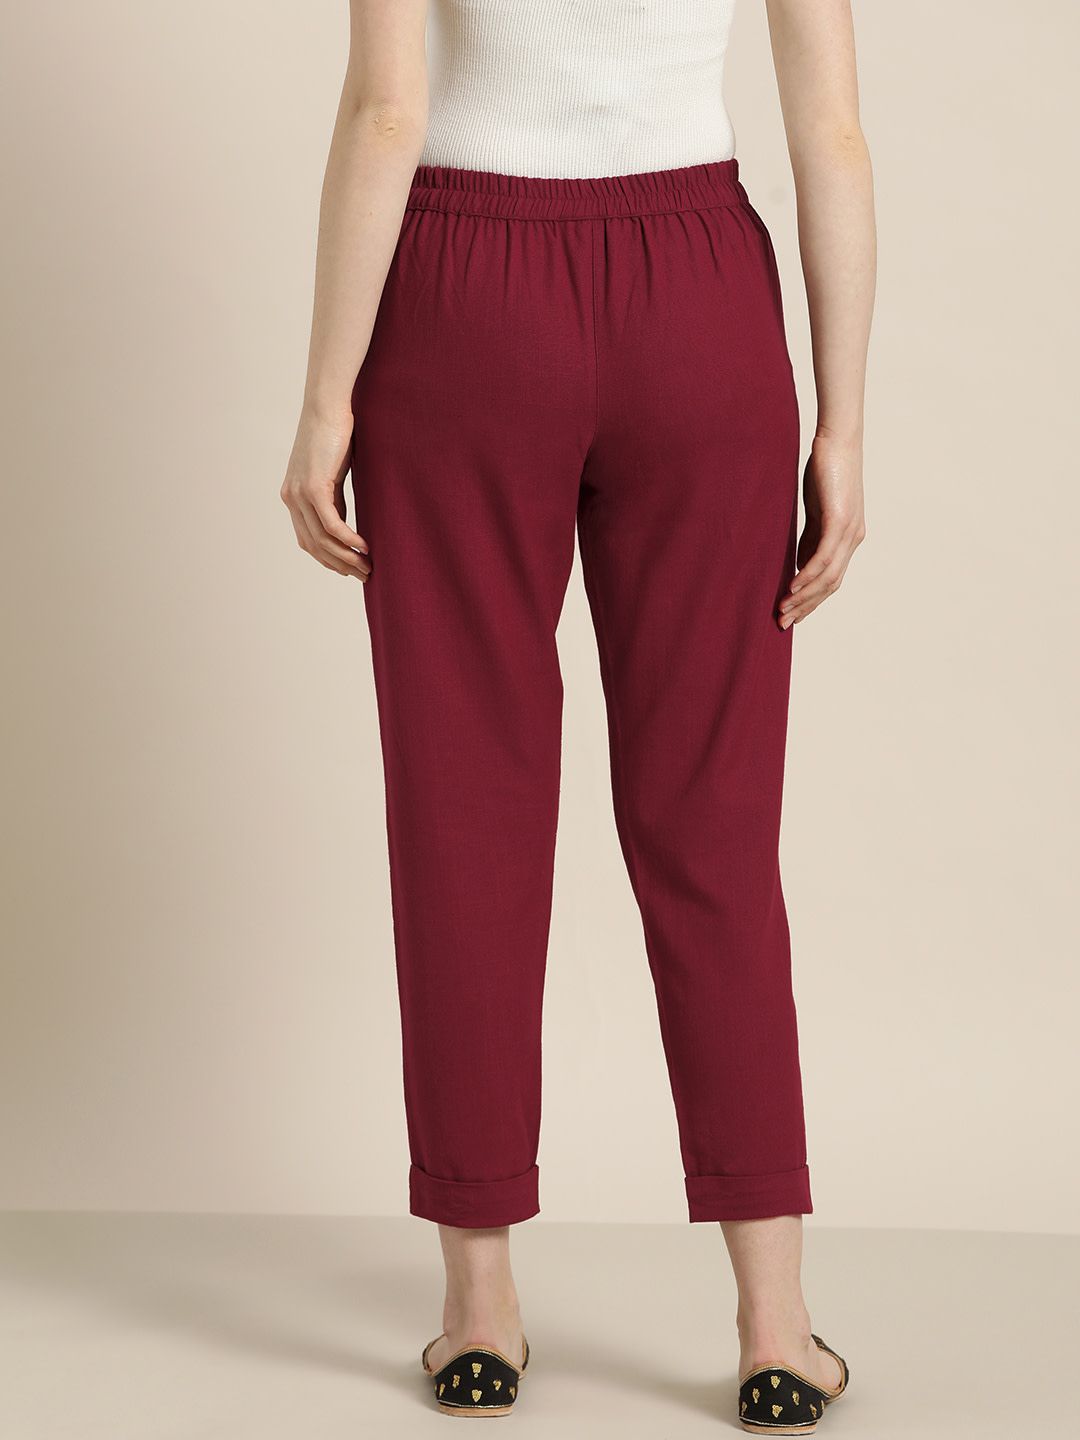 Buy ankle length straight pants for women